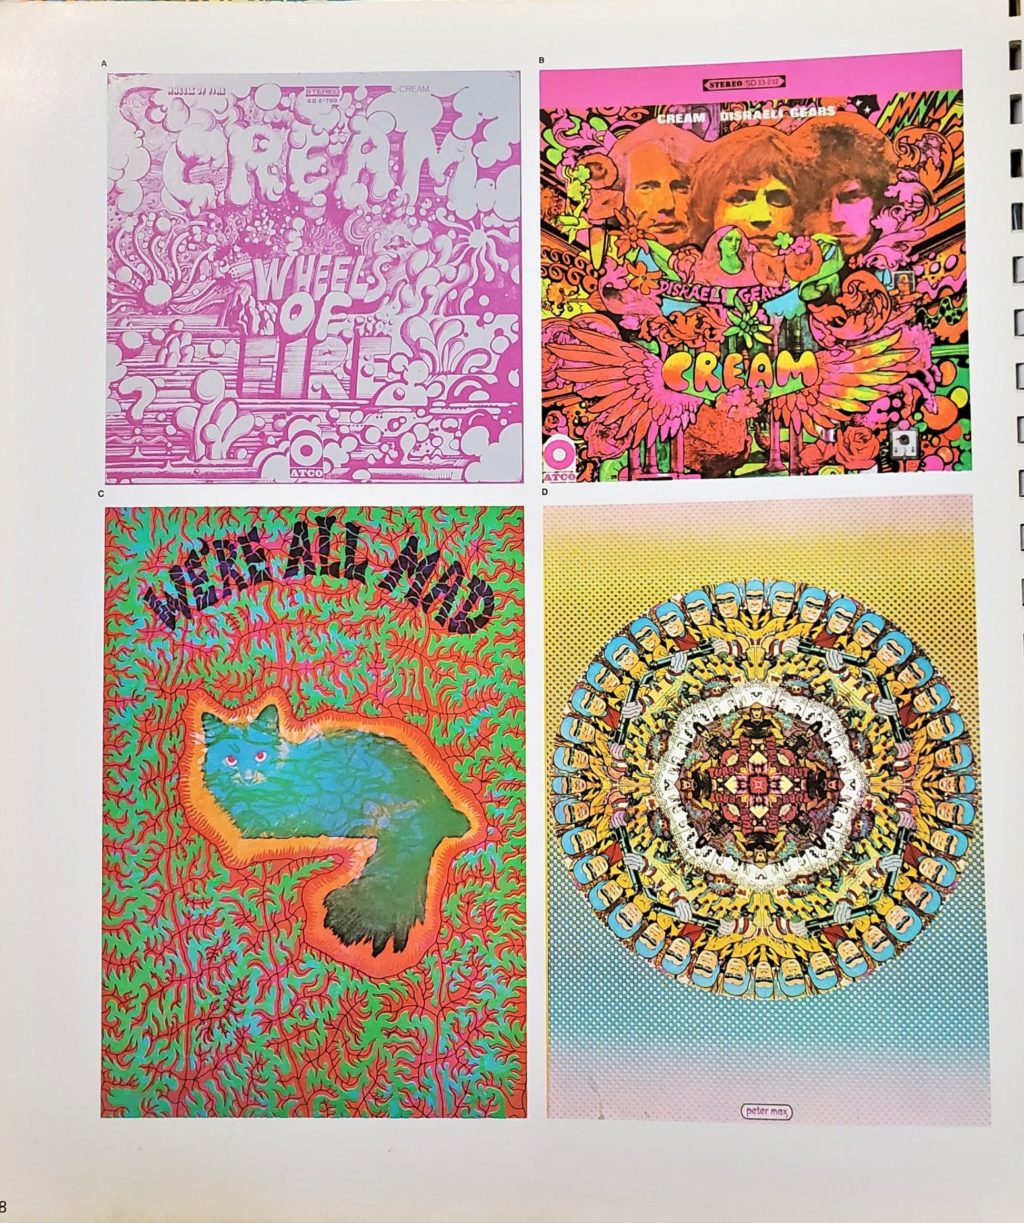 Page with images of album covers and posters, from The Day-Glo® Designer's Guide.